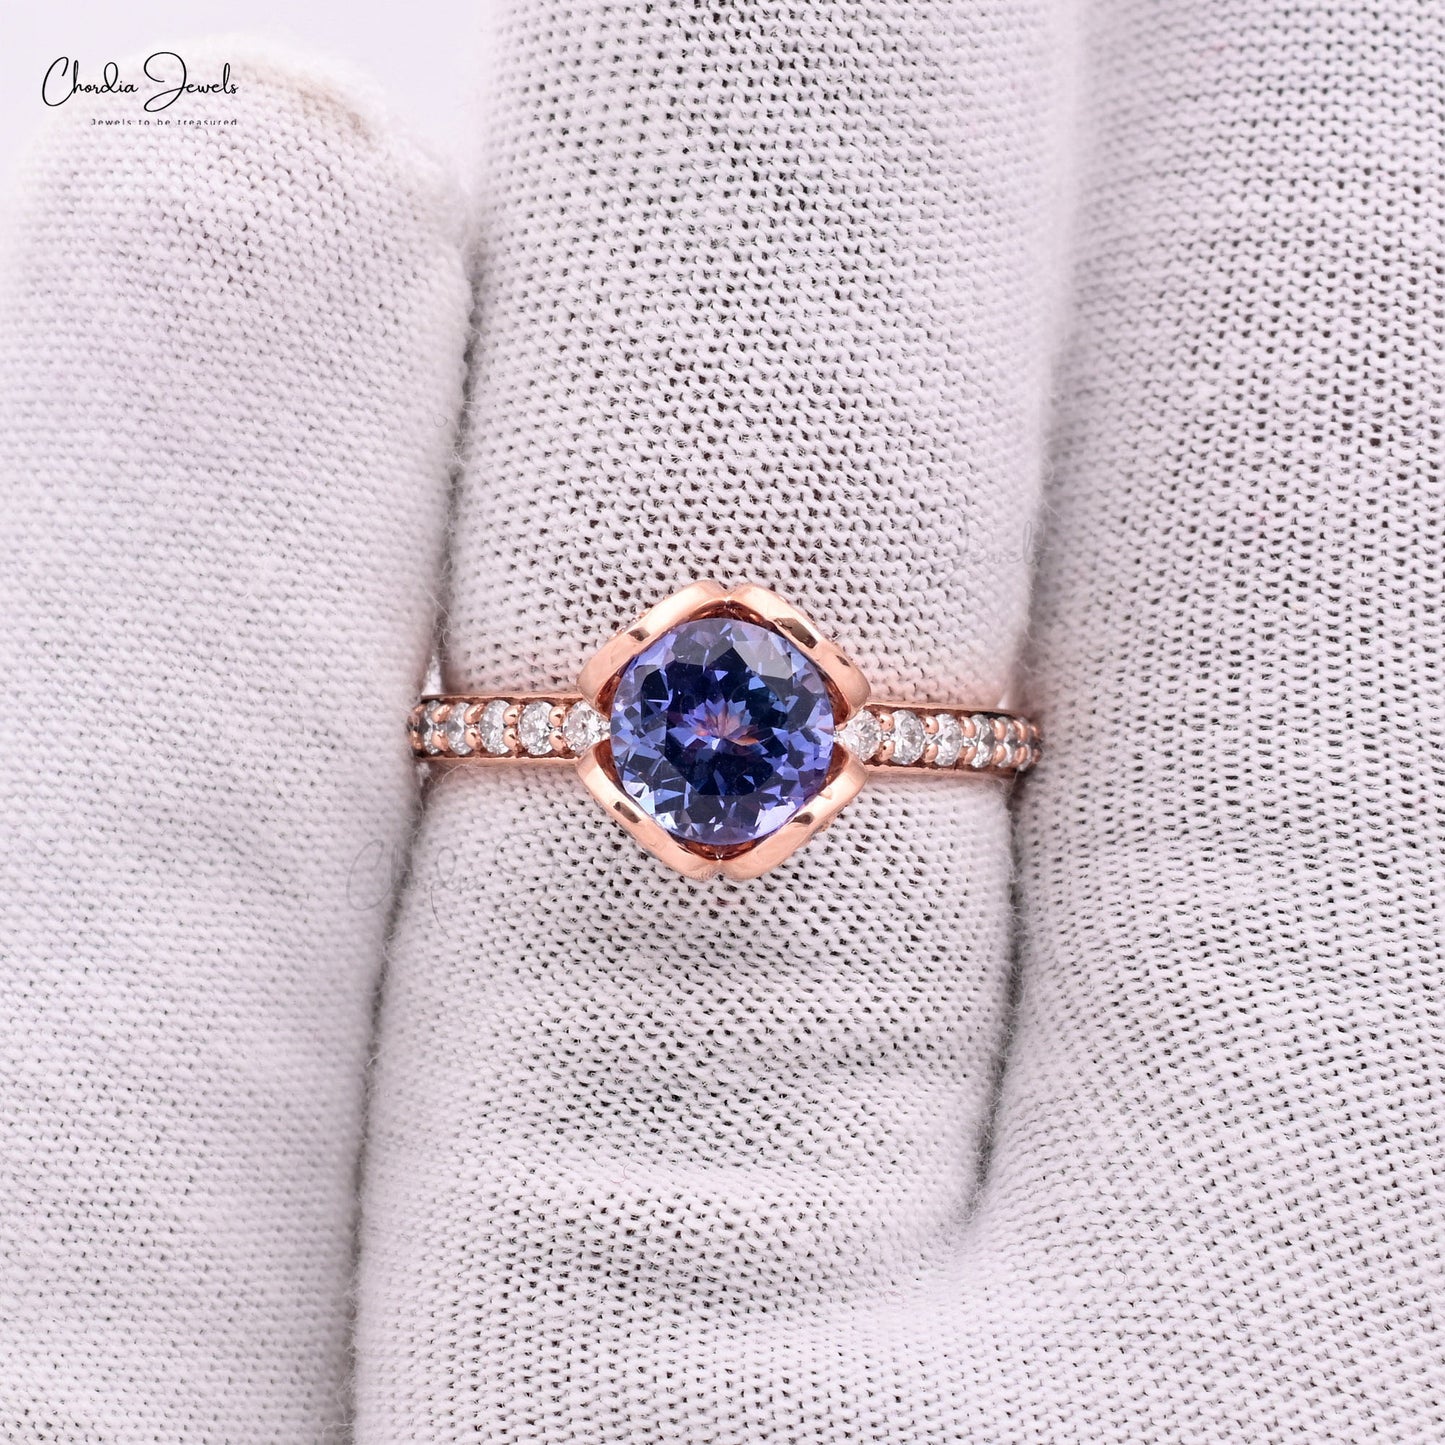 Load image into Gallery viewer, Natural 1.22ct Tanzanite Gemstone Floral Wedding Ring 14k Rose Gold Diamond Ring For Gift
